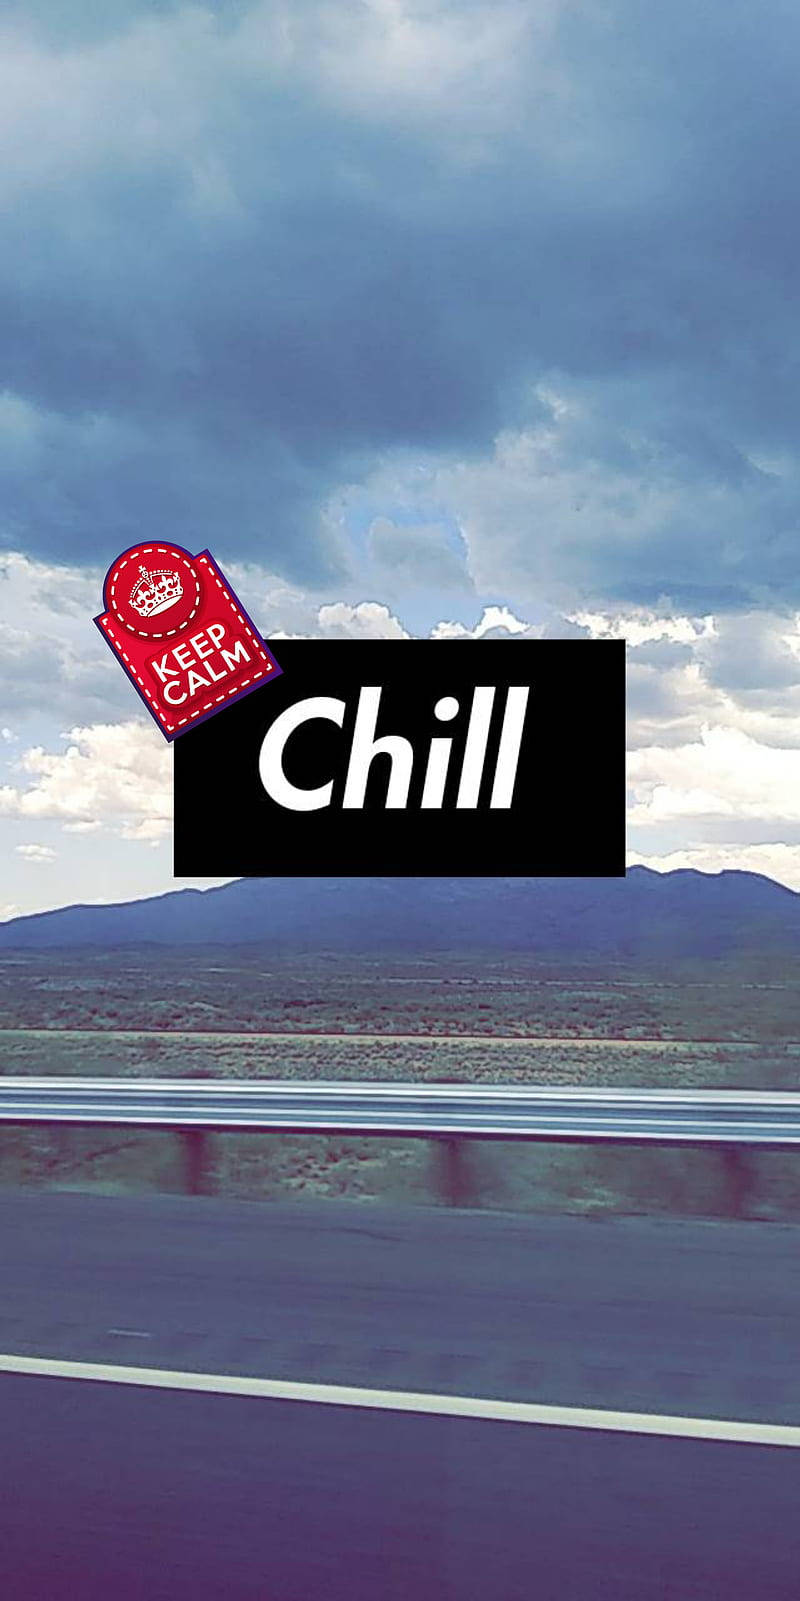 Keep Calm And Chill